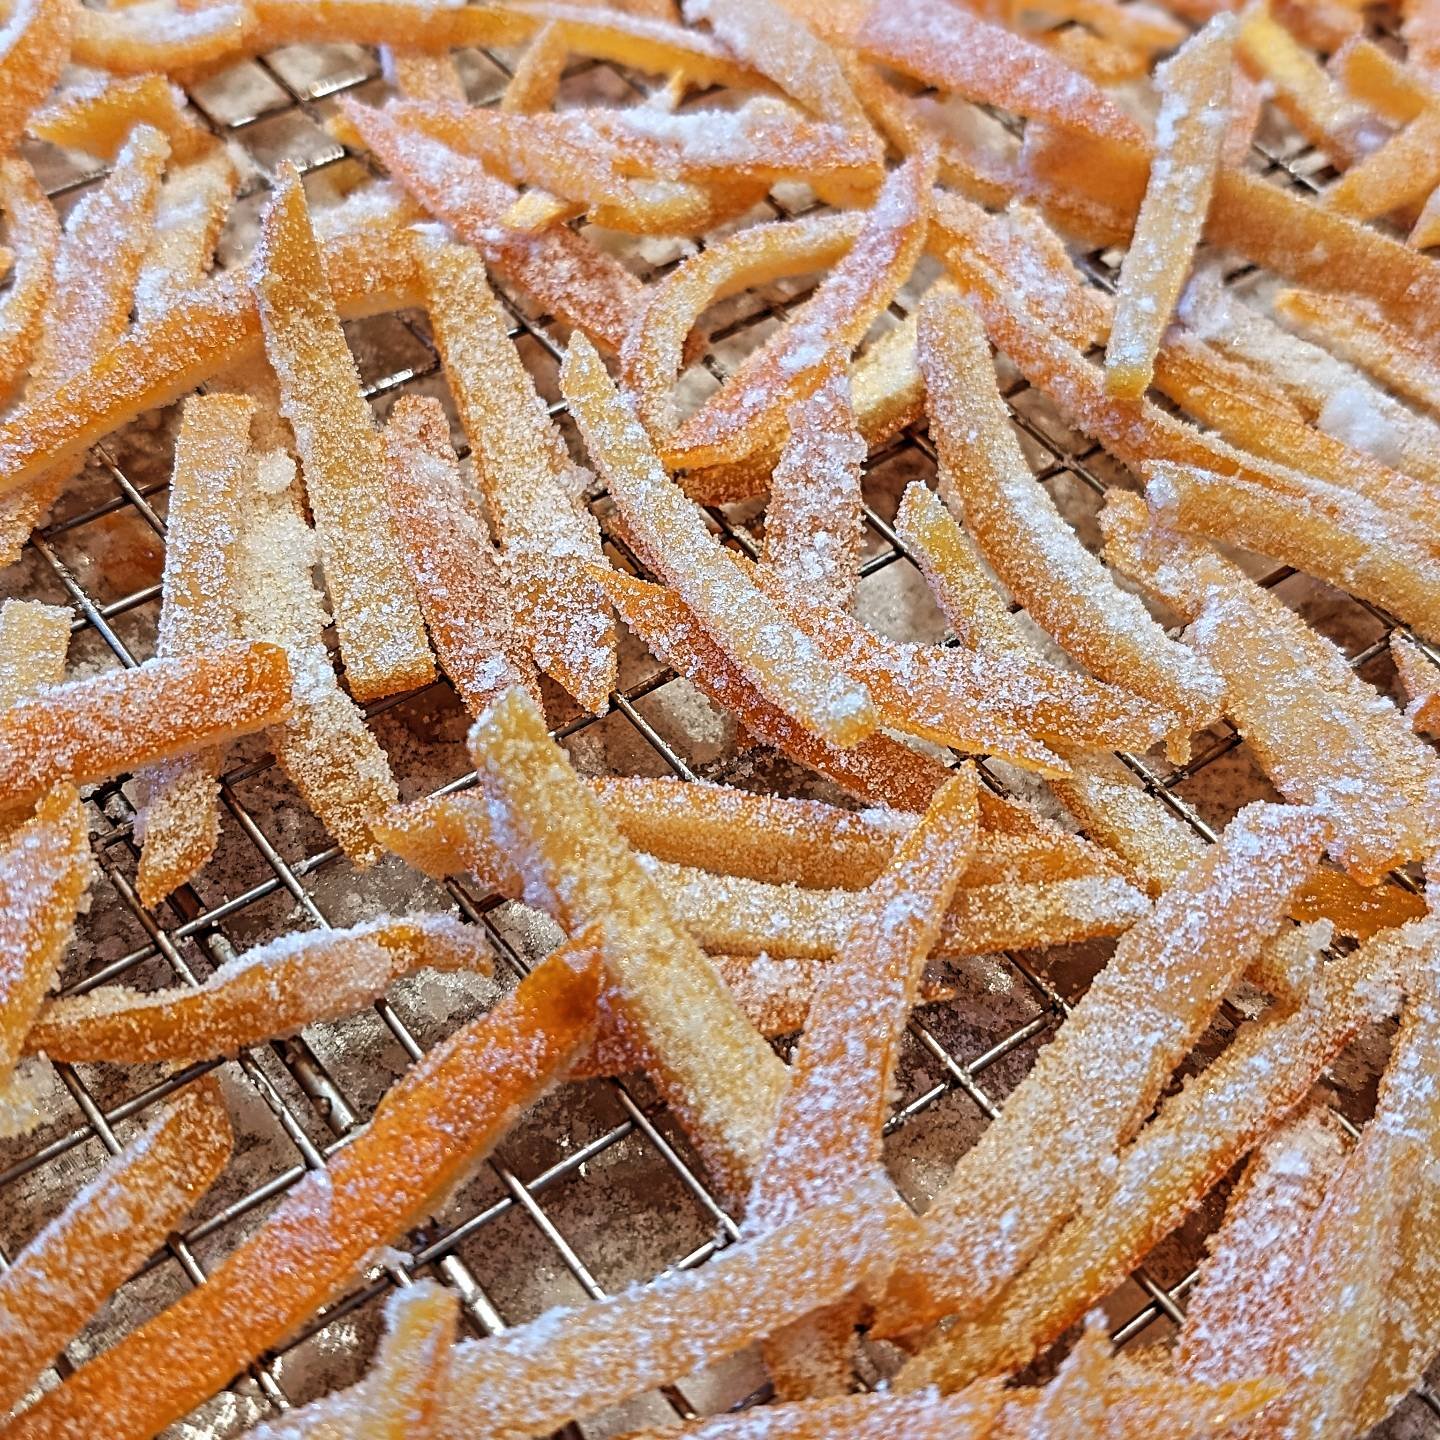 I love the versatility of candied citrus peels. I've heard customers using them for everything from cocktail garnishes to cookie ingredients